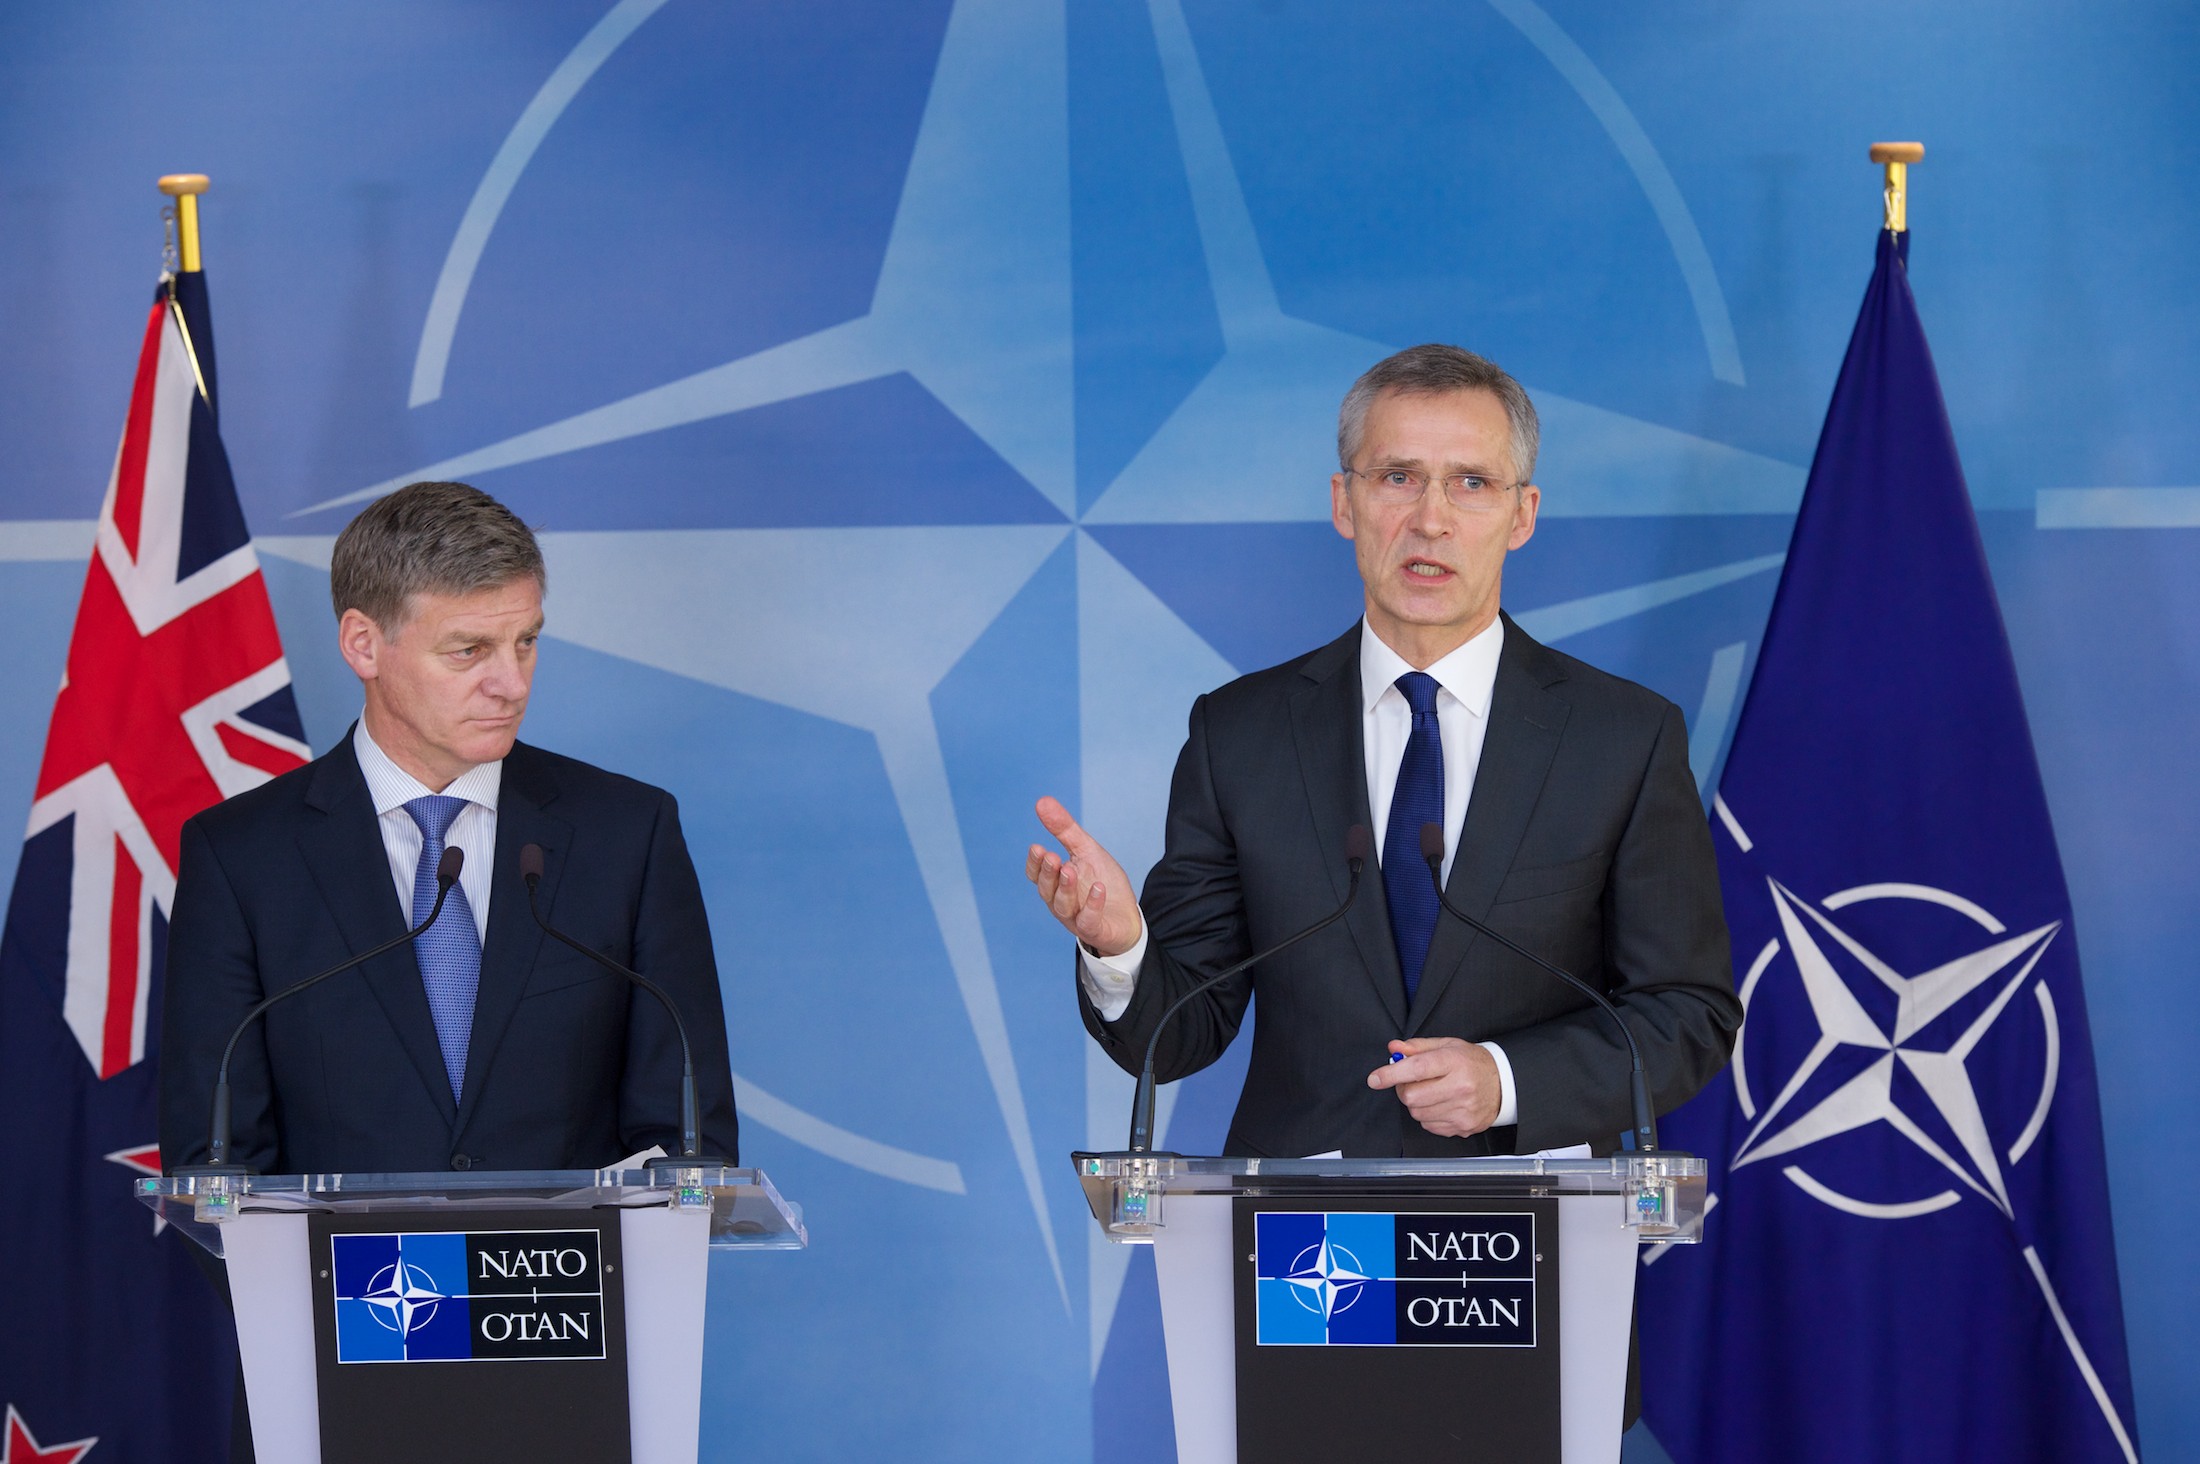 Joint press point with NATO Secretary General Jens Stoltenberg and the Prime Minister of New Zealand, Bill English. (Photo: NATO)